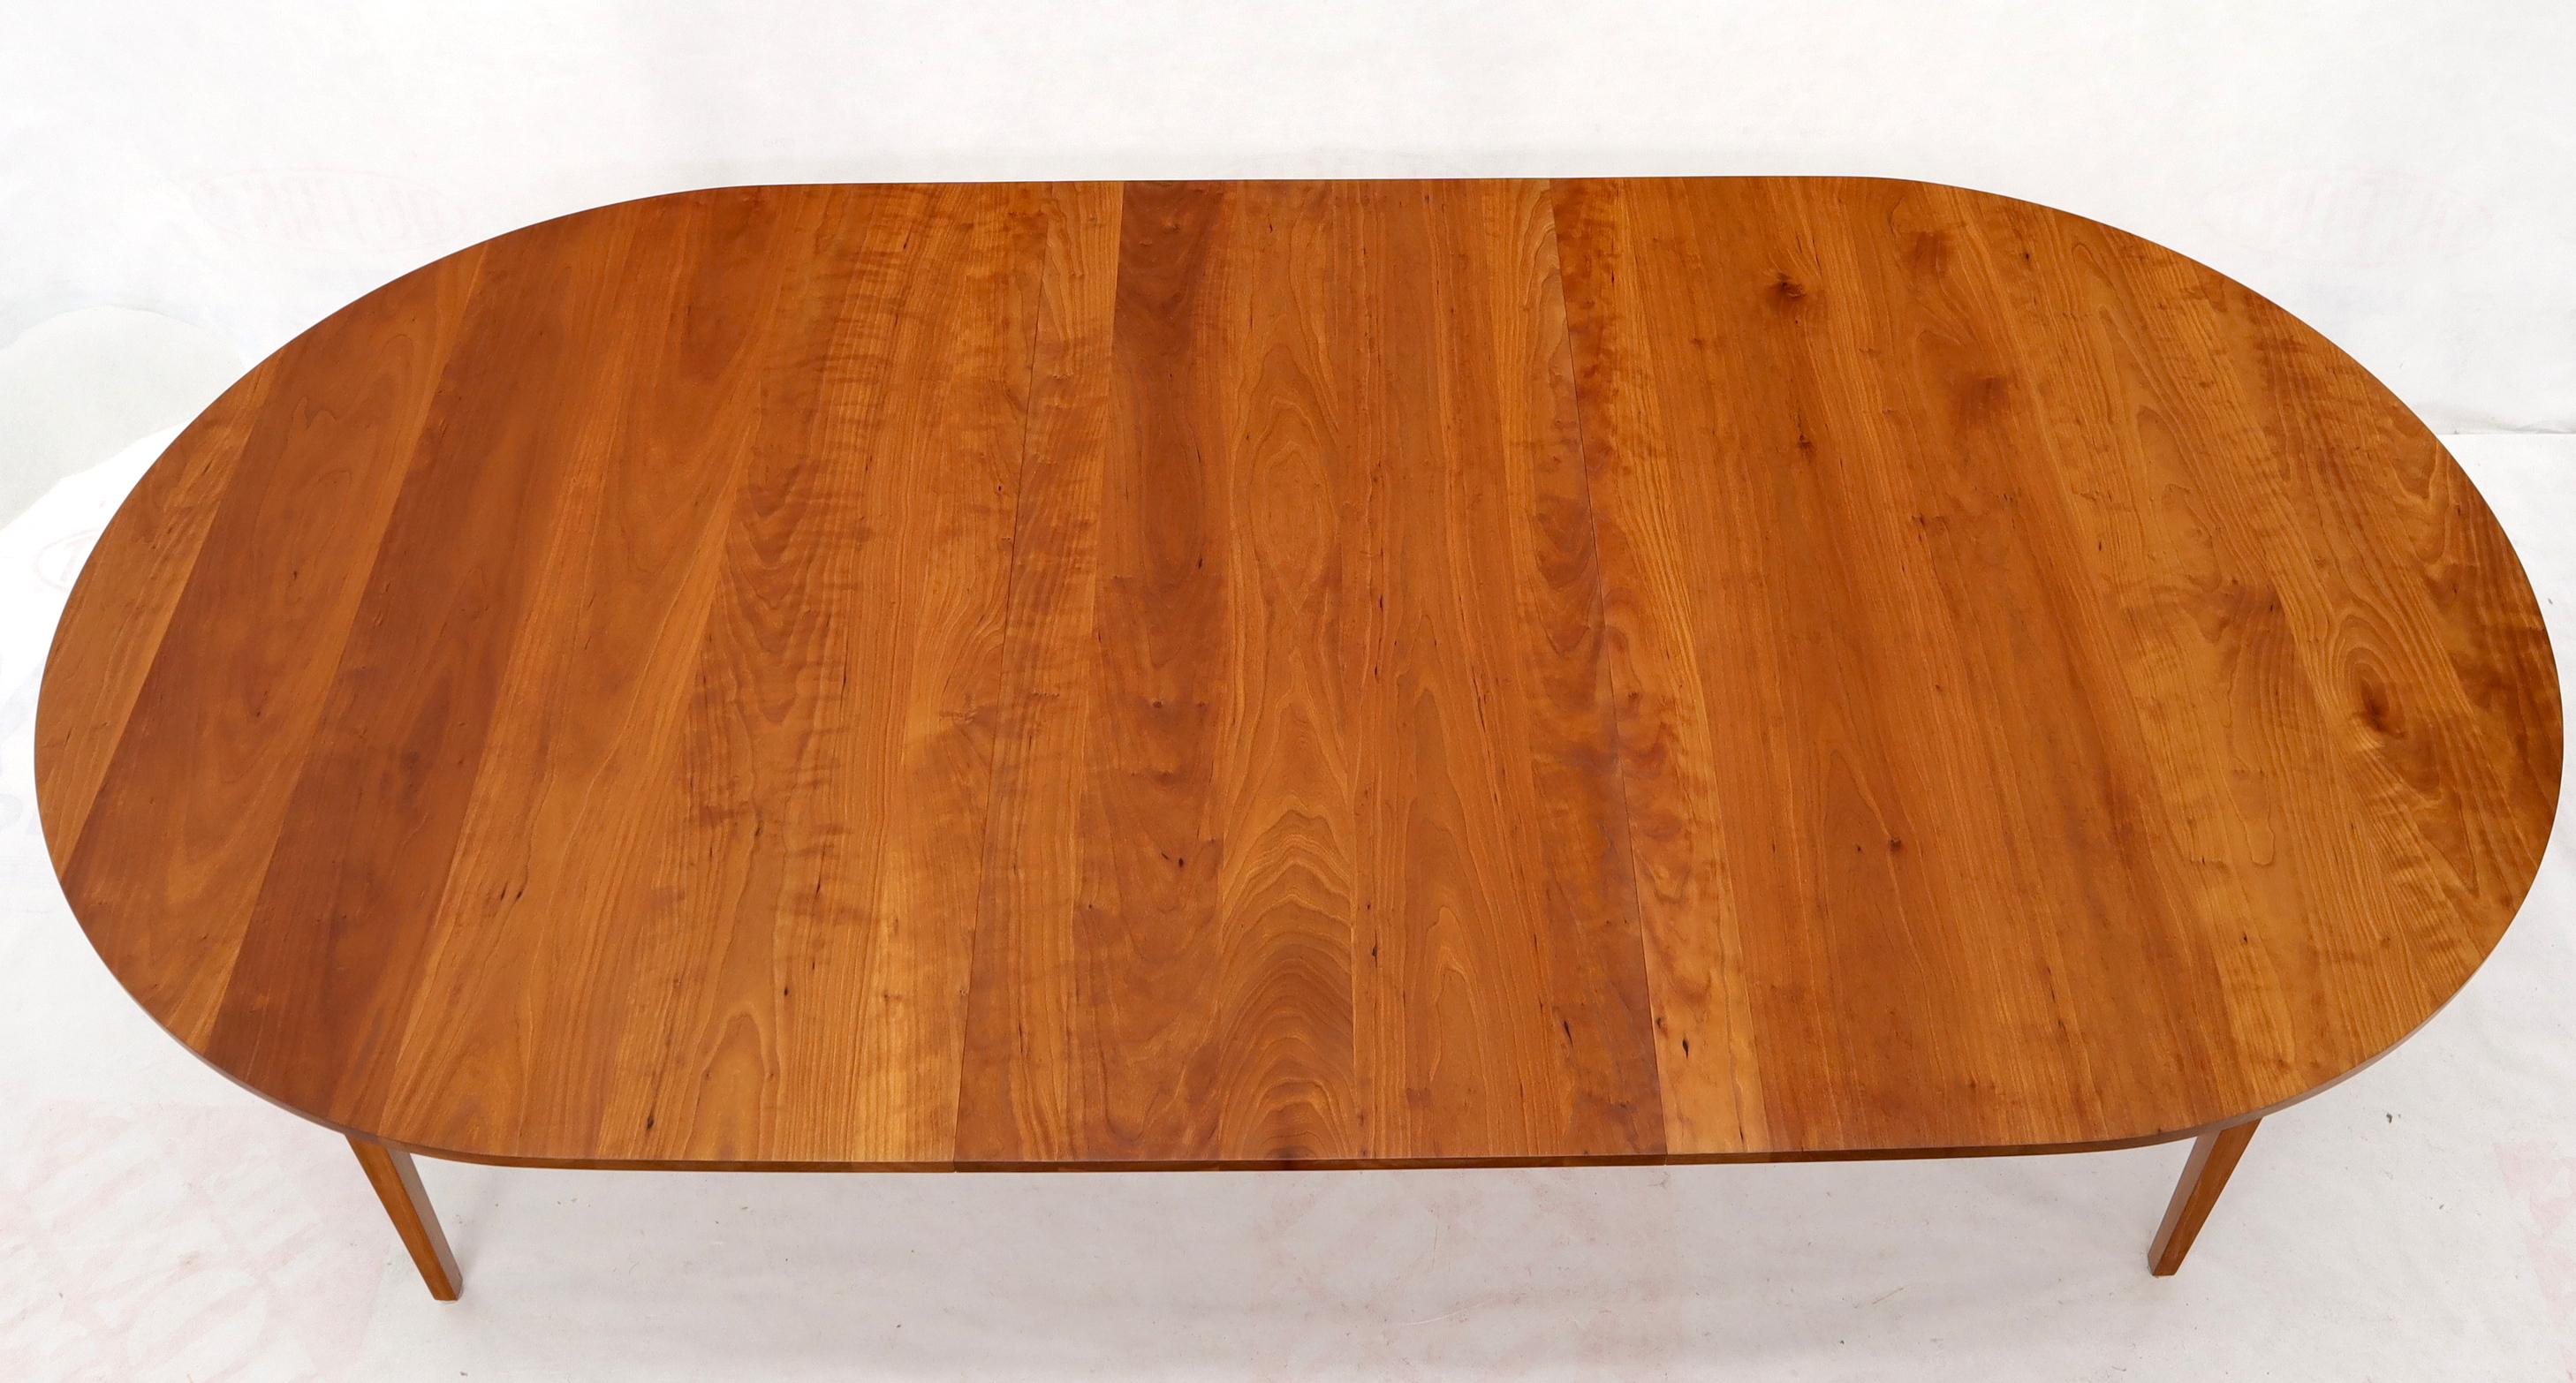 20th Century Thomas Moser Signed Oval Solid Cherry Dining Table with One Leaf